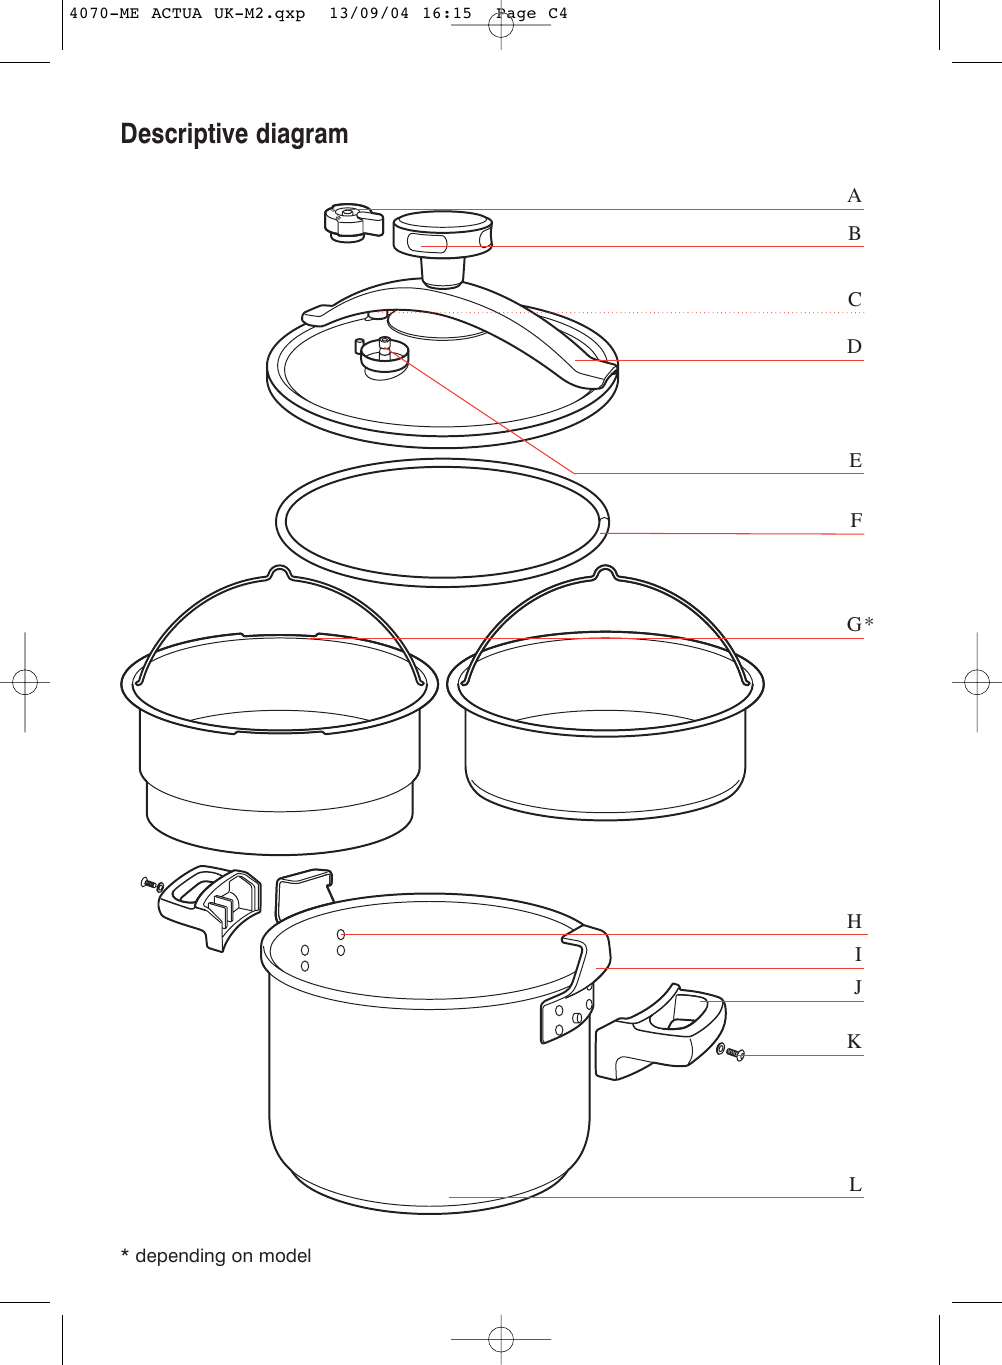 t fal pressure cooker instructions